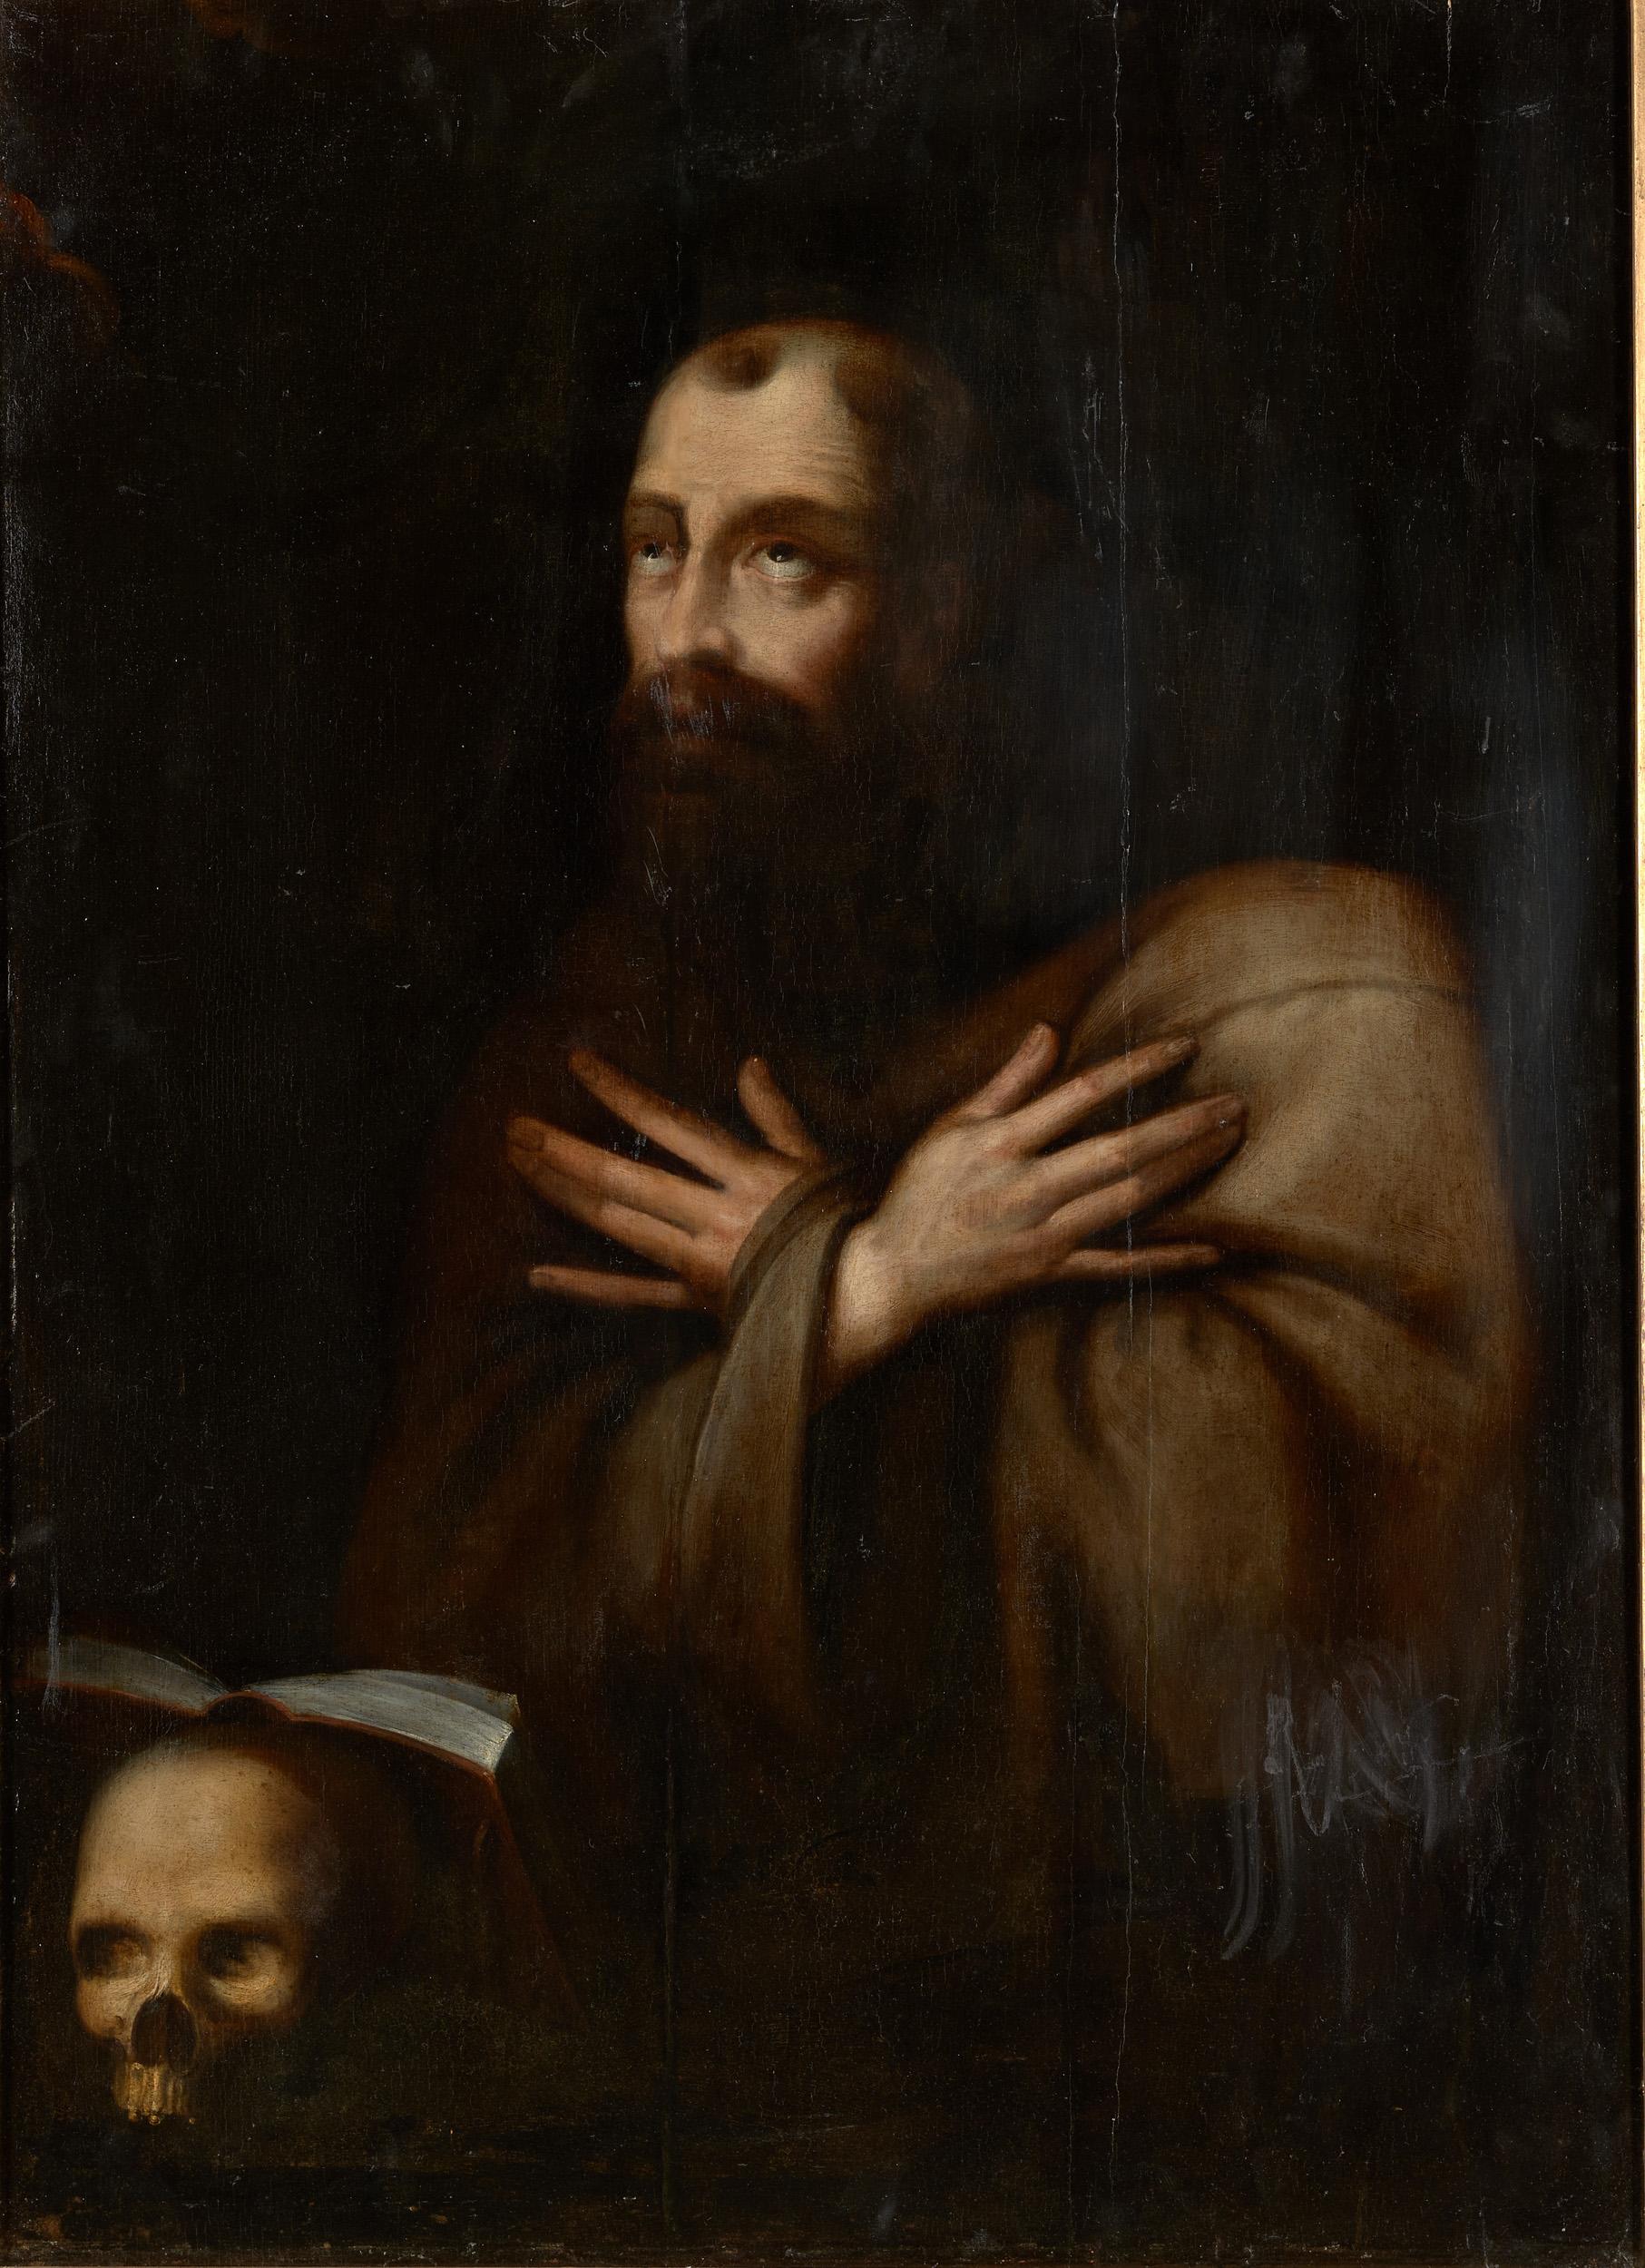 This 17th century panel painting is a depiction of a praying Franciscan monk, or of Saint Francis. The grey-brown habit, the skull and the book are the iconographical elements that identify the monk as Franciscan, or as Saint Francis in prayer. The